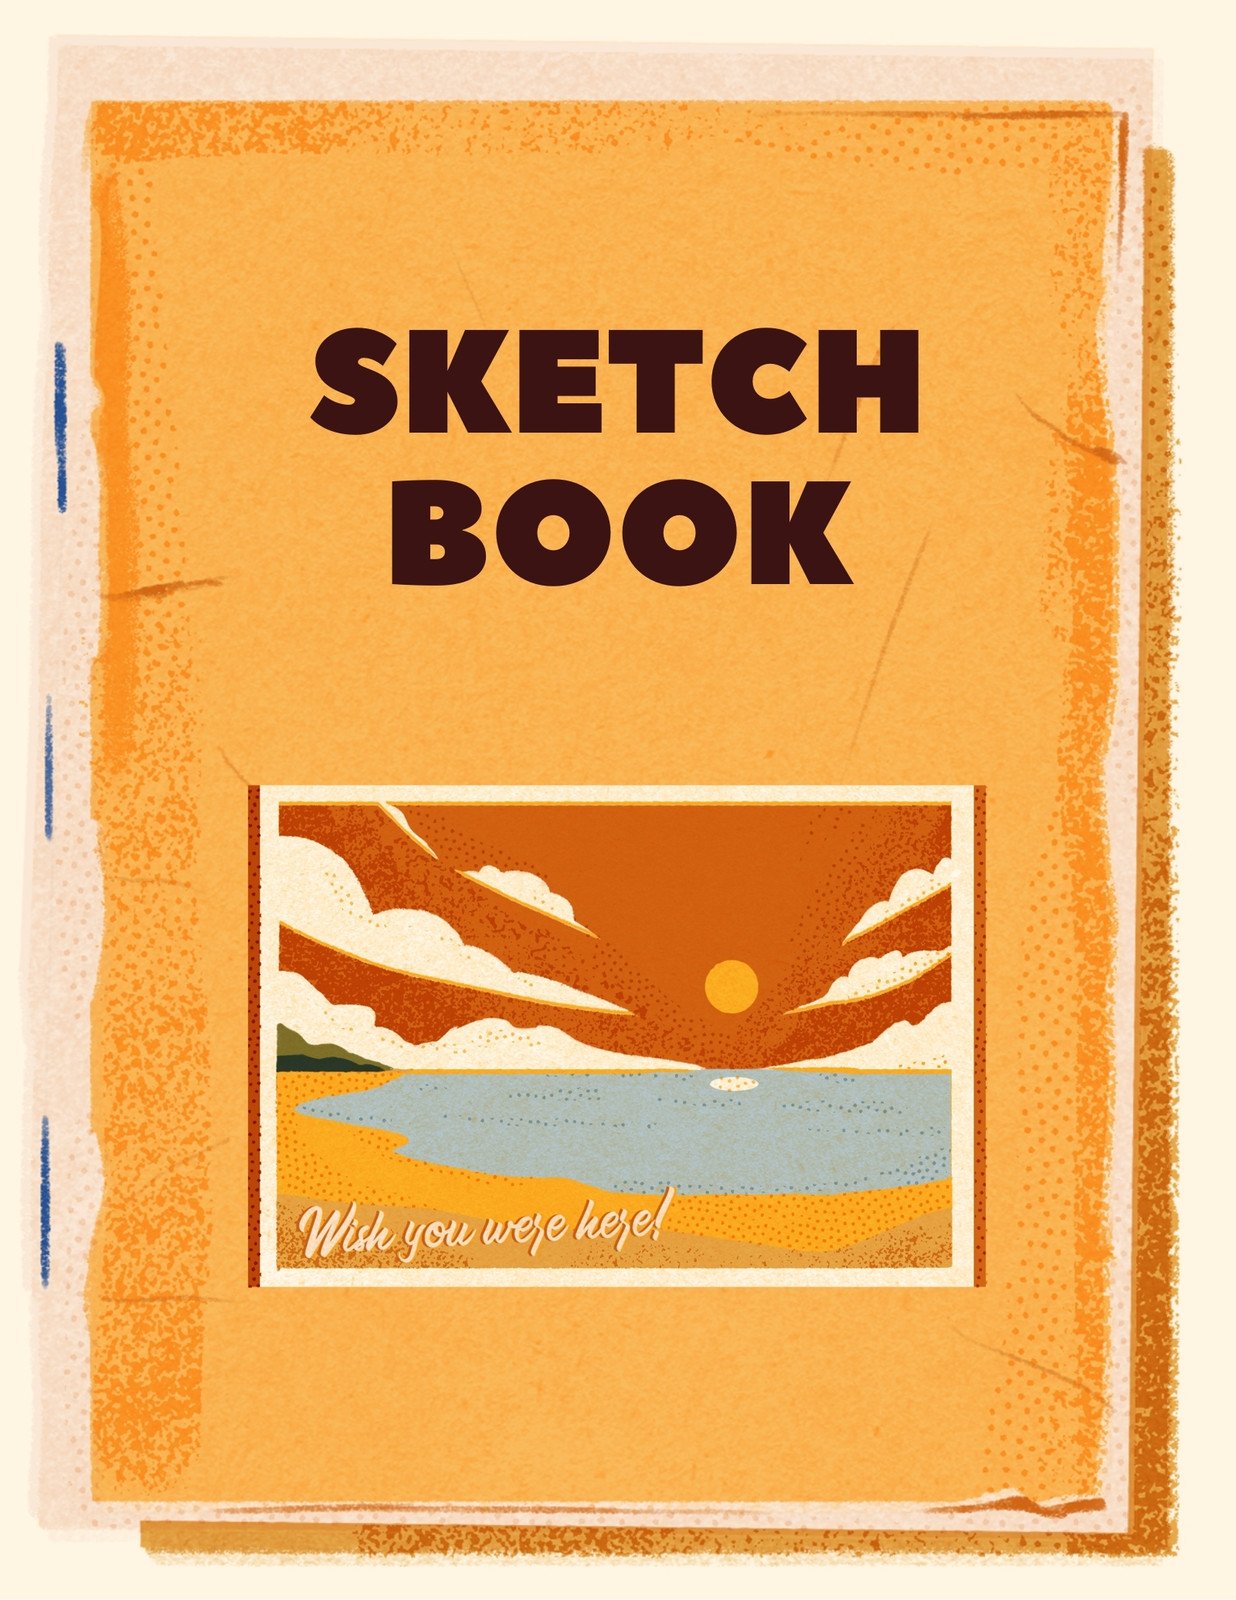 Free and customizable sketch templates